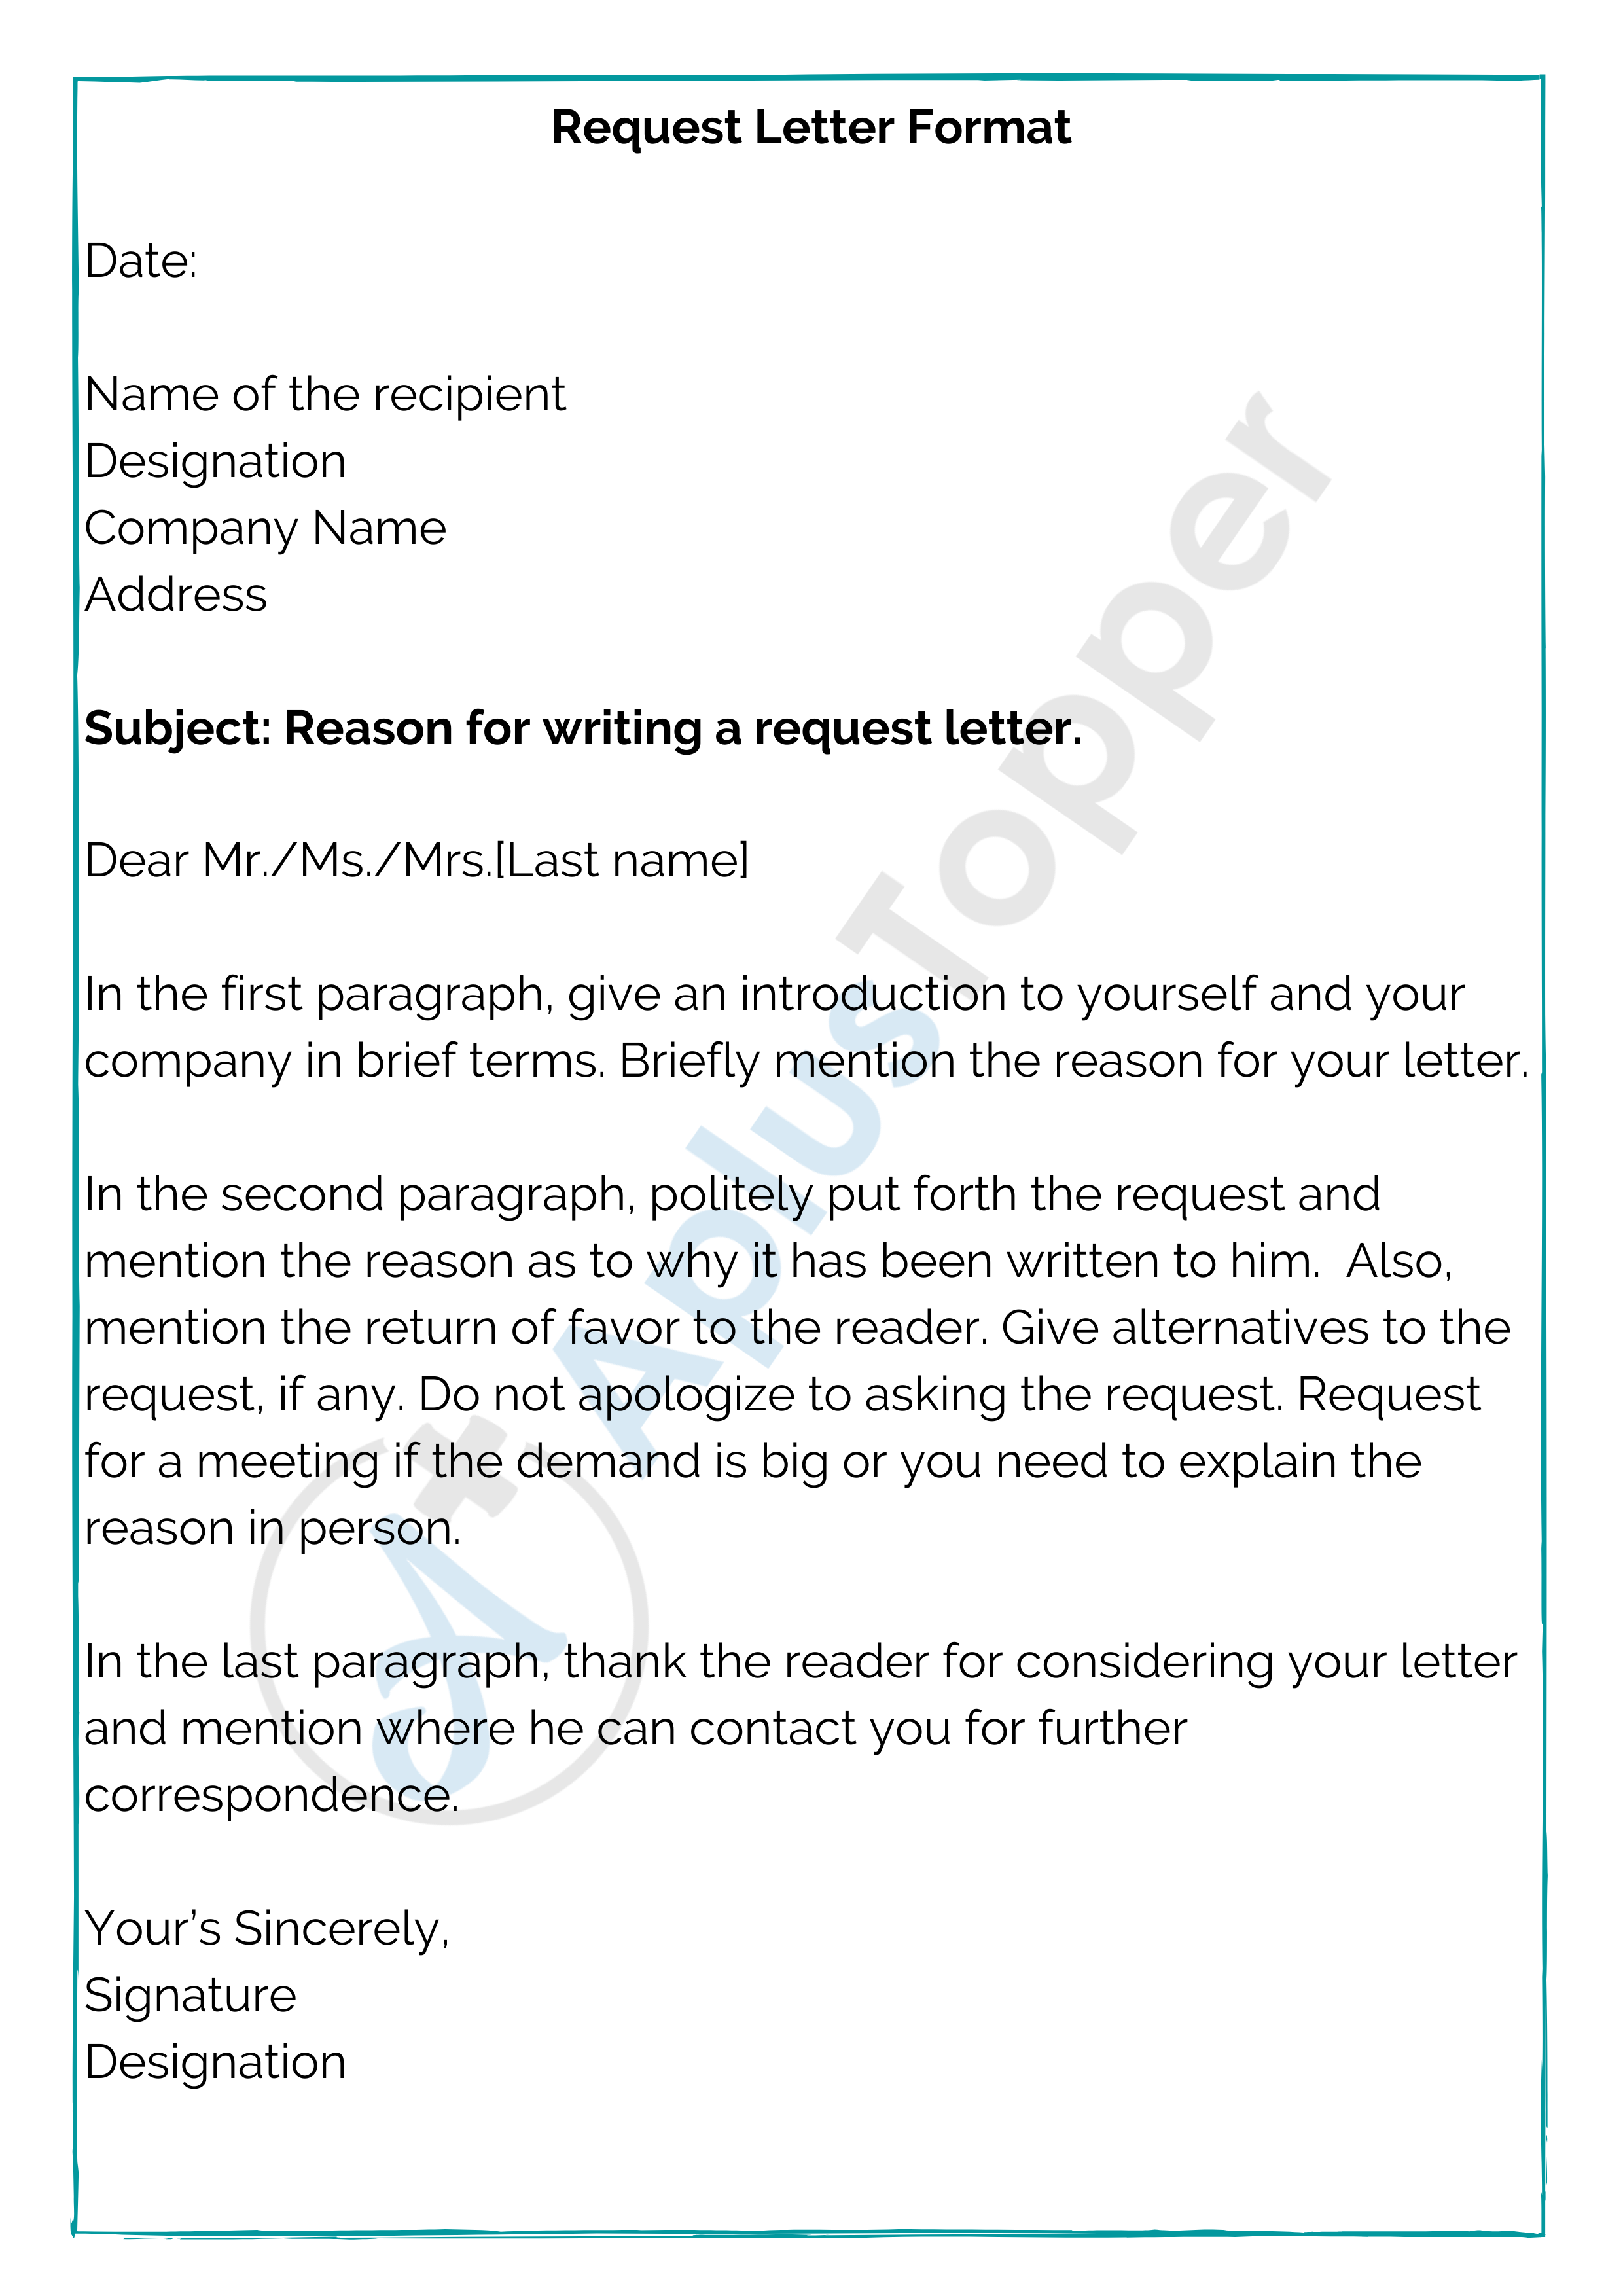 Request Letter  Format, Template and Samples  Request Letter for